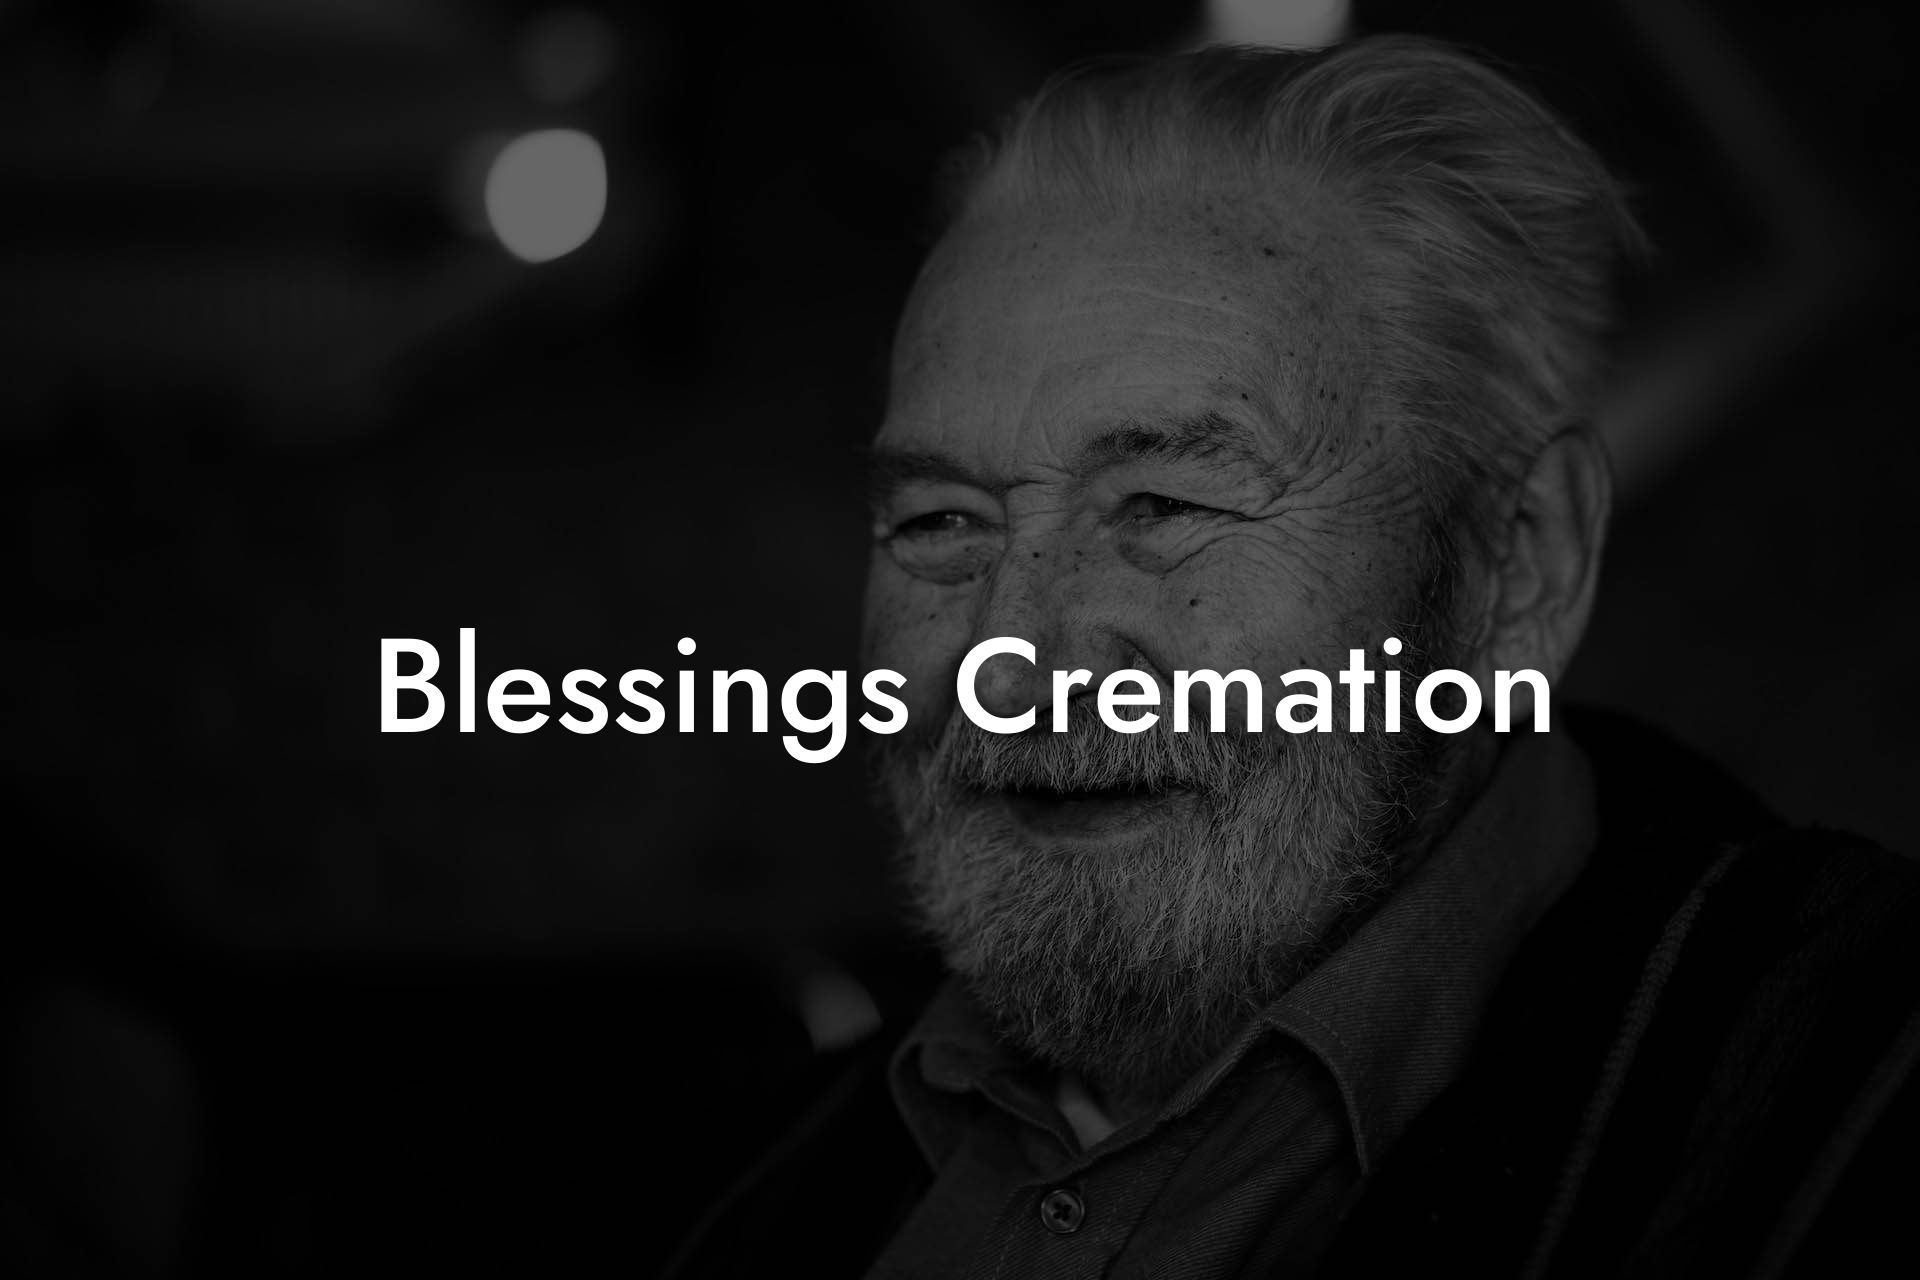 Blessings Cremation